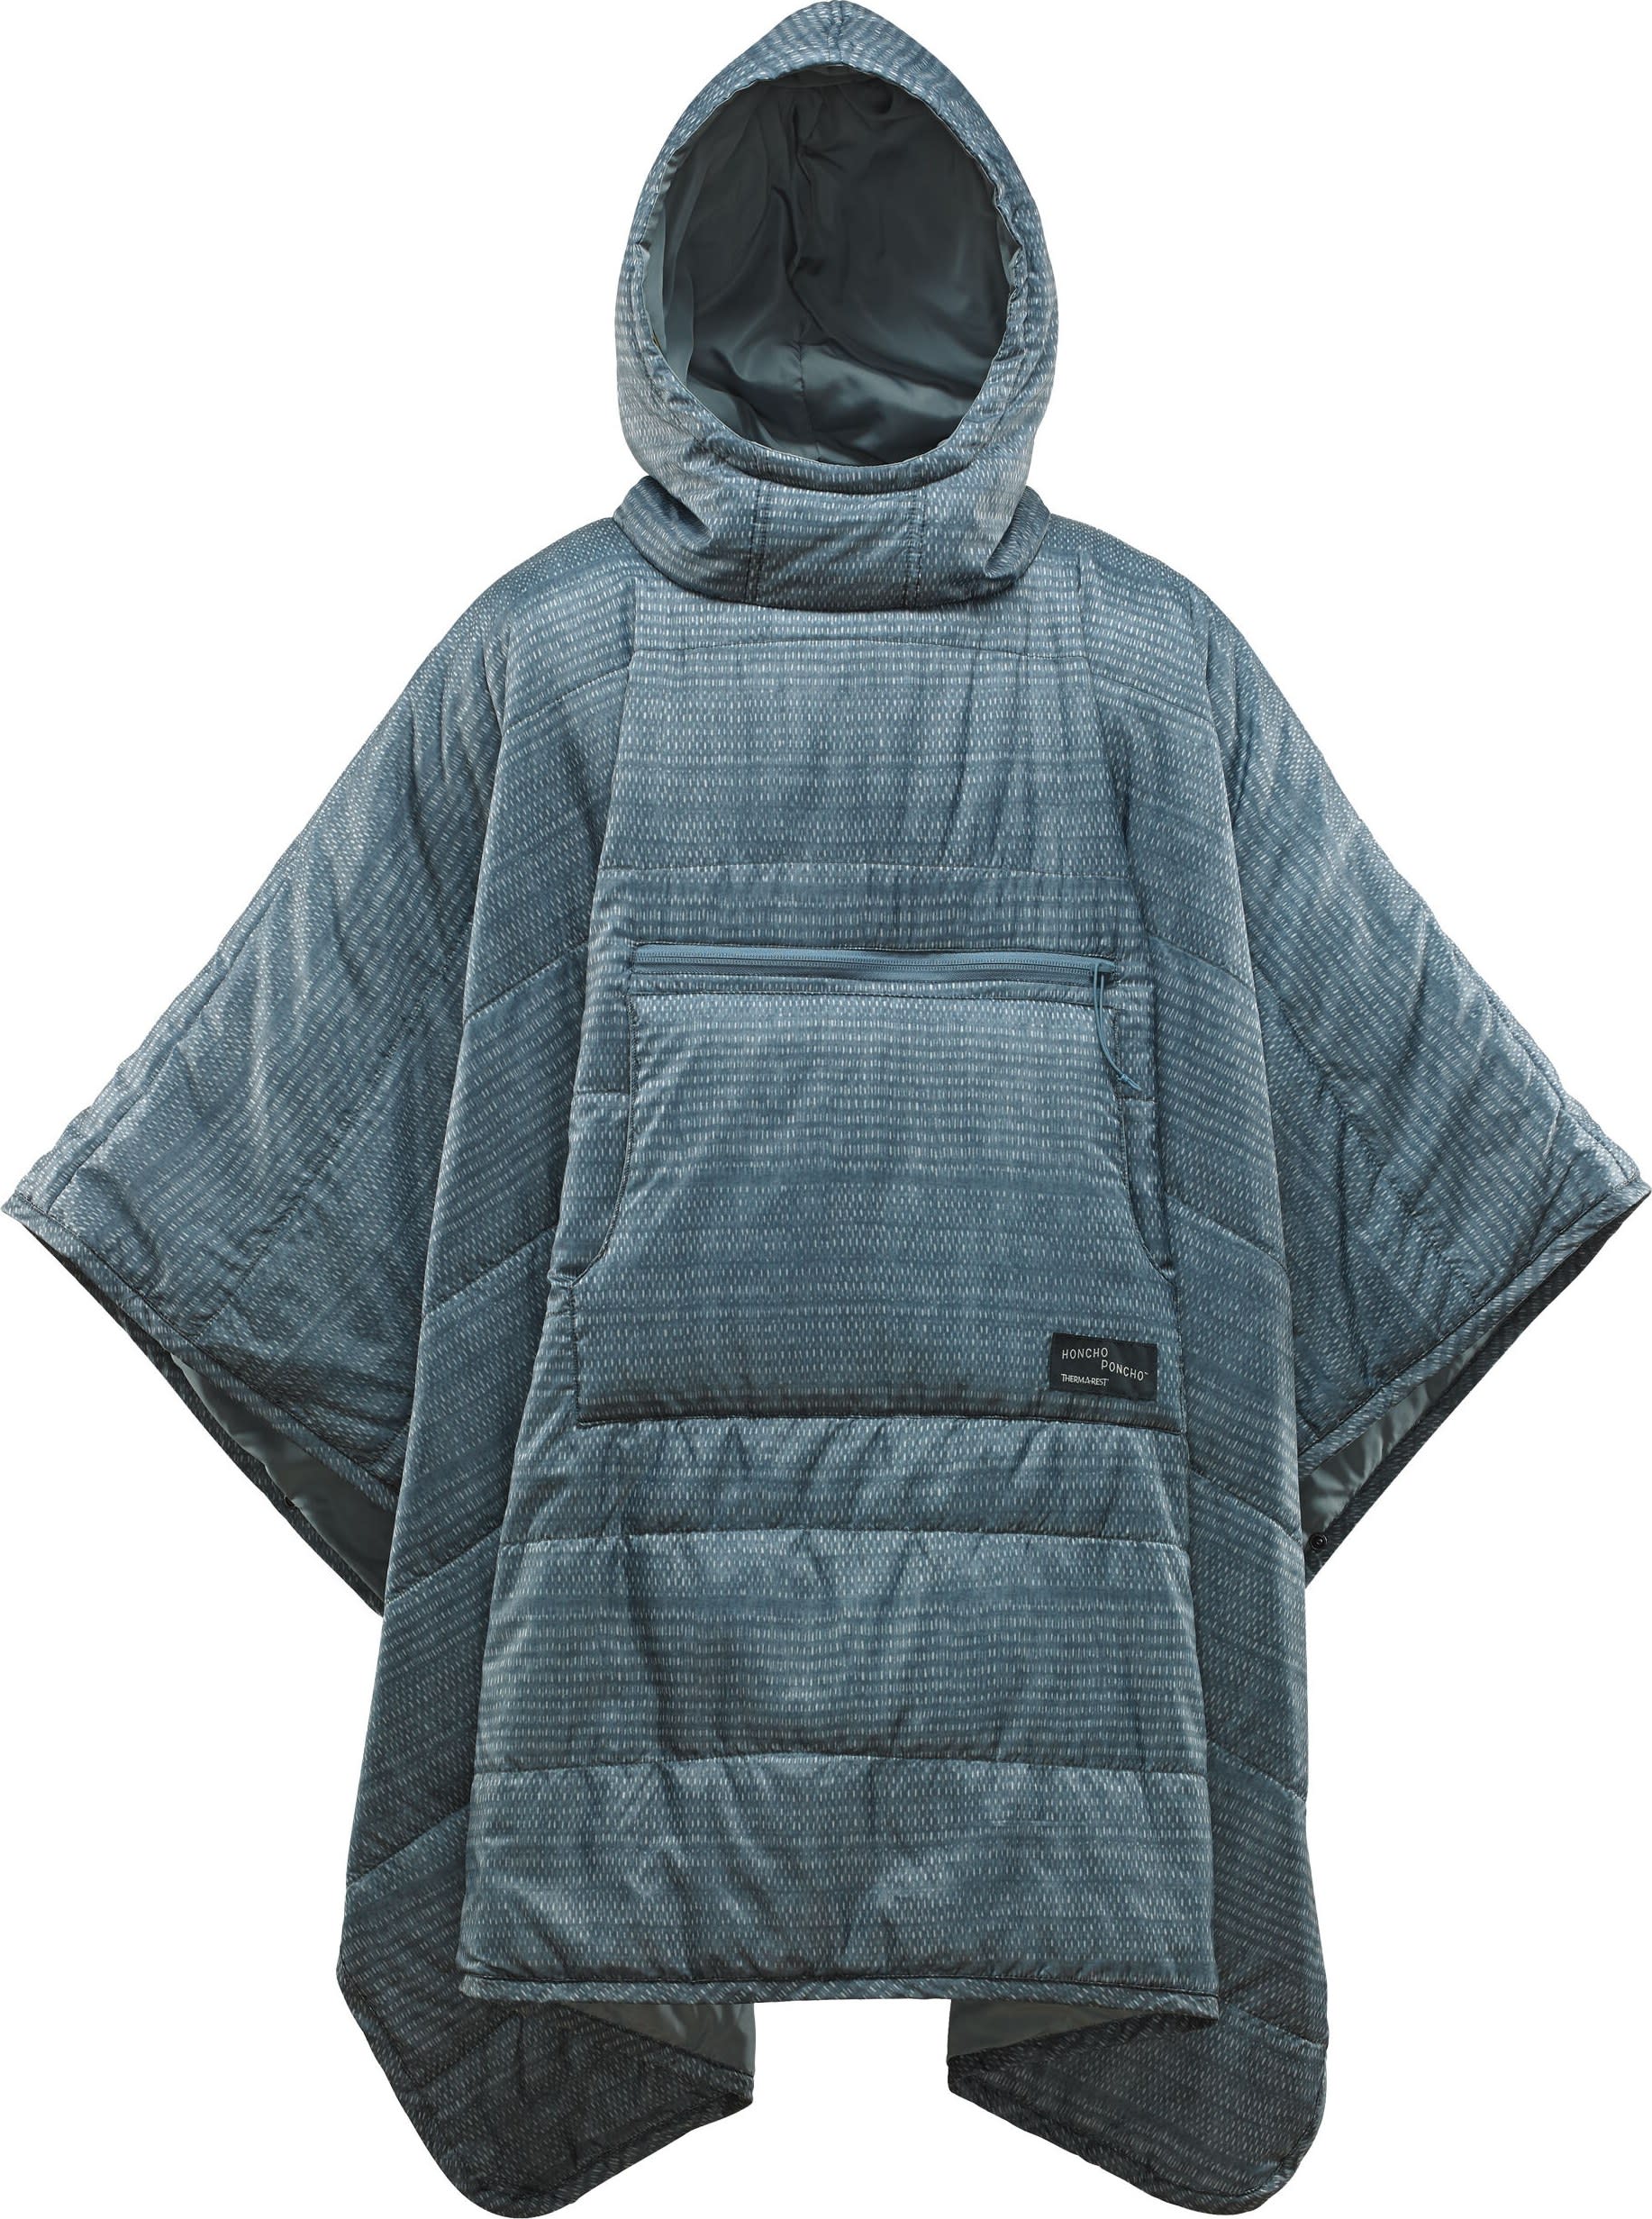 Therm-A-Rest Honcho Poncho Blue Woven